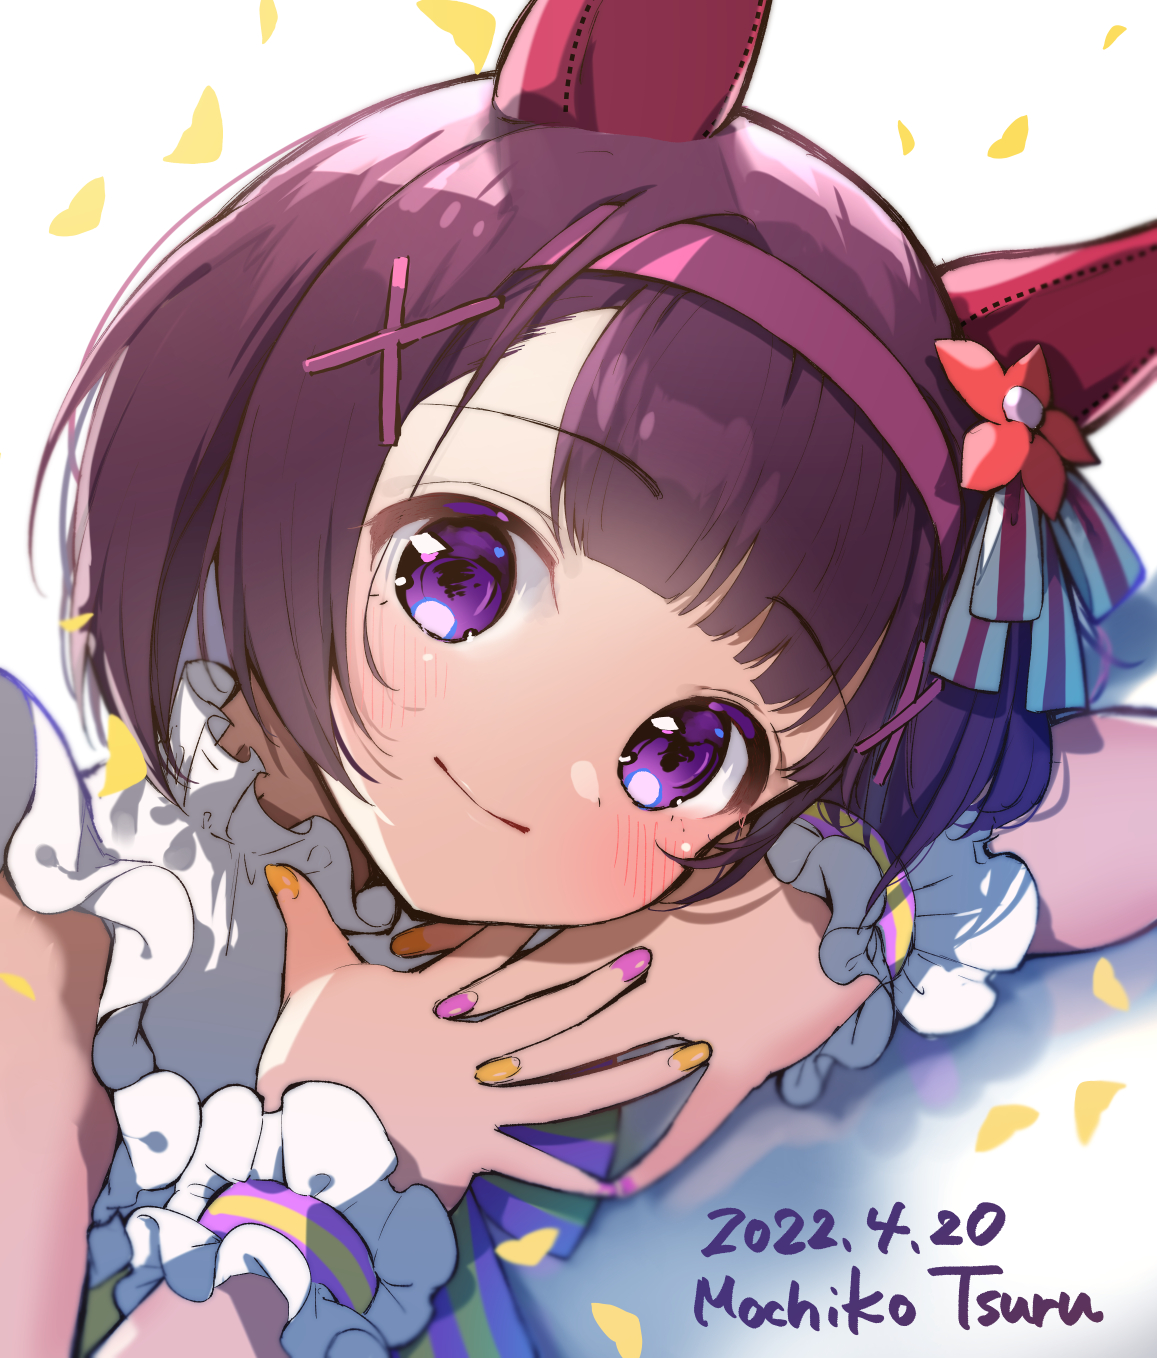 Anime 1157x1358 anime anime girls Uma Musume Pretty Derby Nishino Flower (Uma Musume) brunette horse girls animal ears artwork fan art watermarked 2022 (year) face painted nails yellow nails pink nails purple eyes looking at viewer shoulder length hair